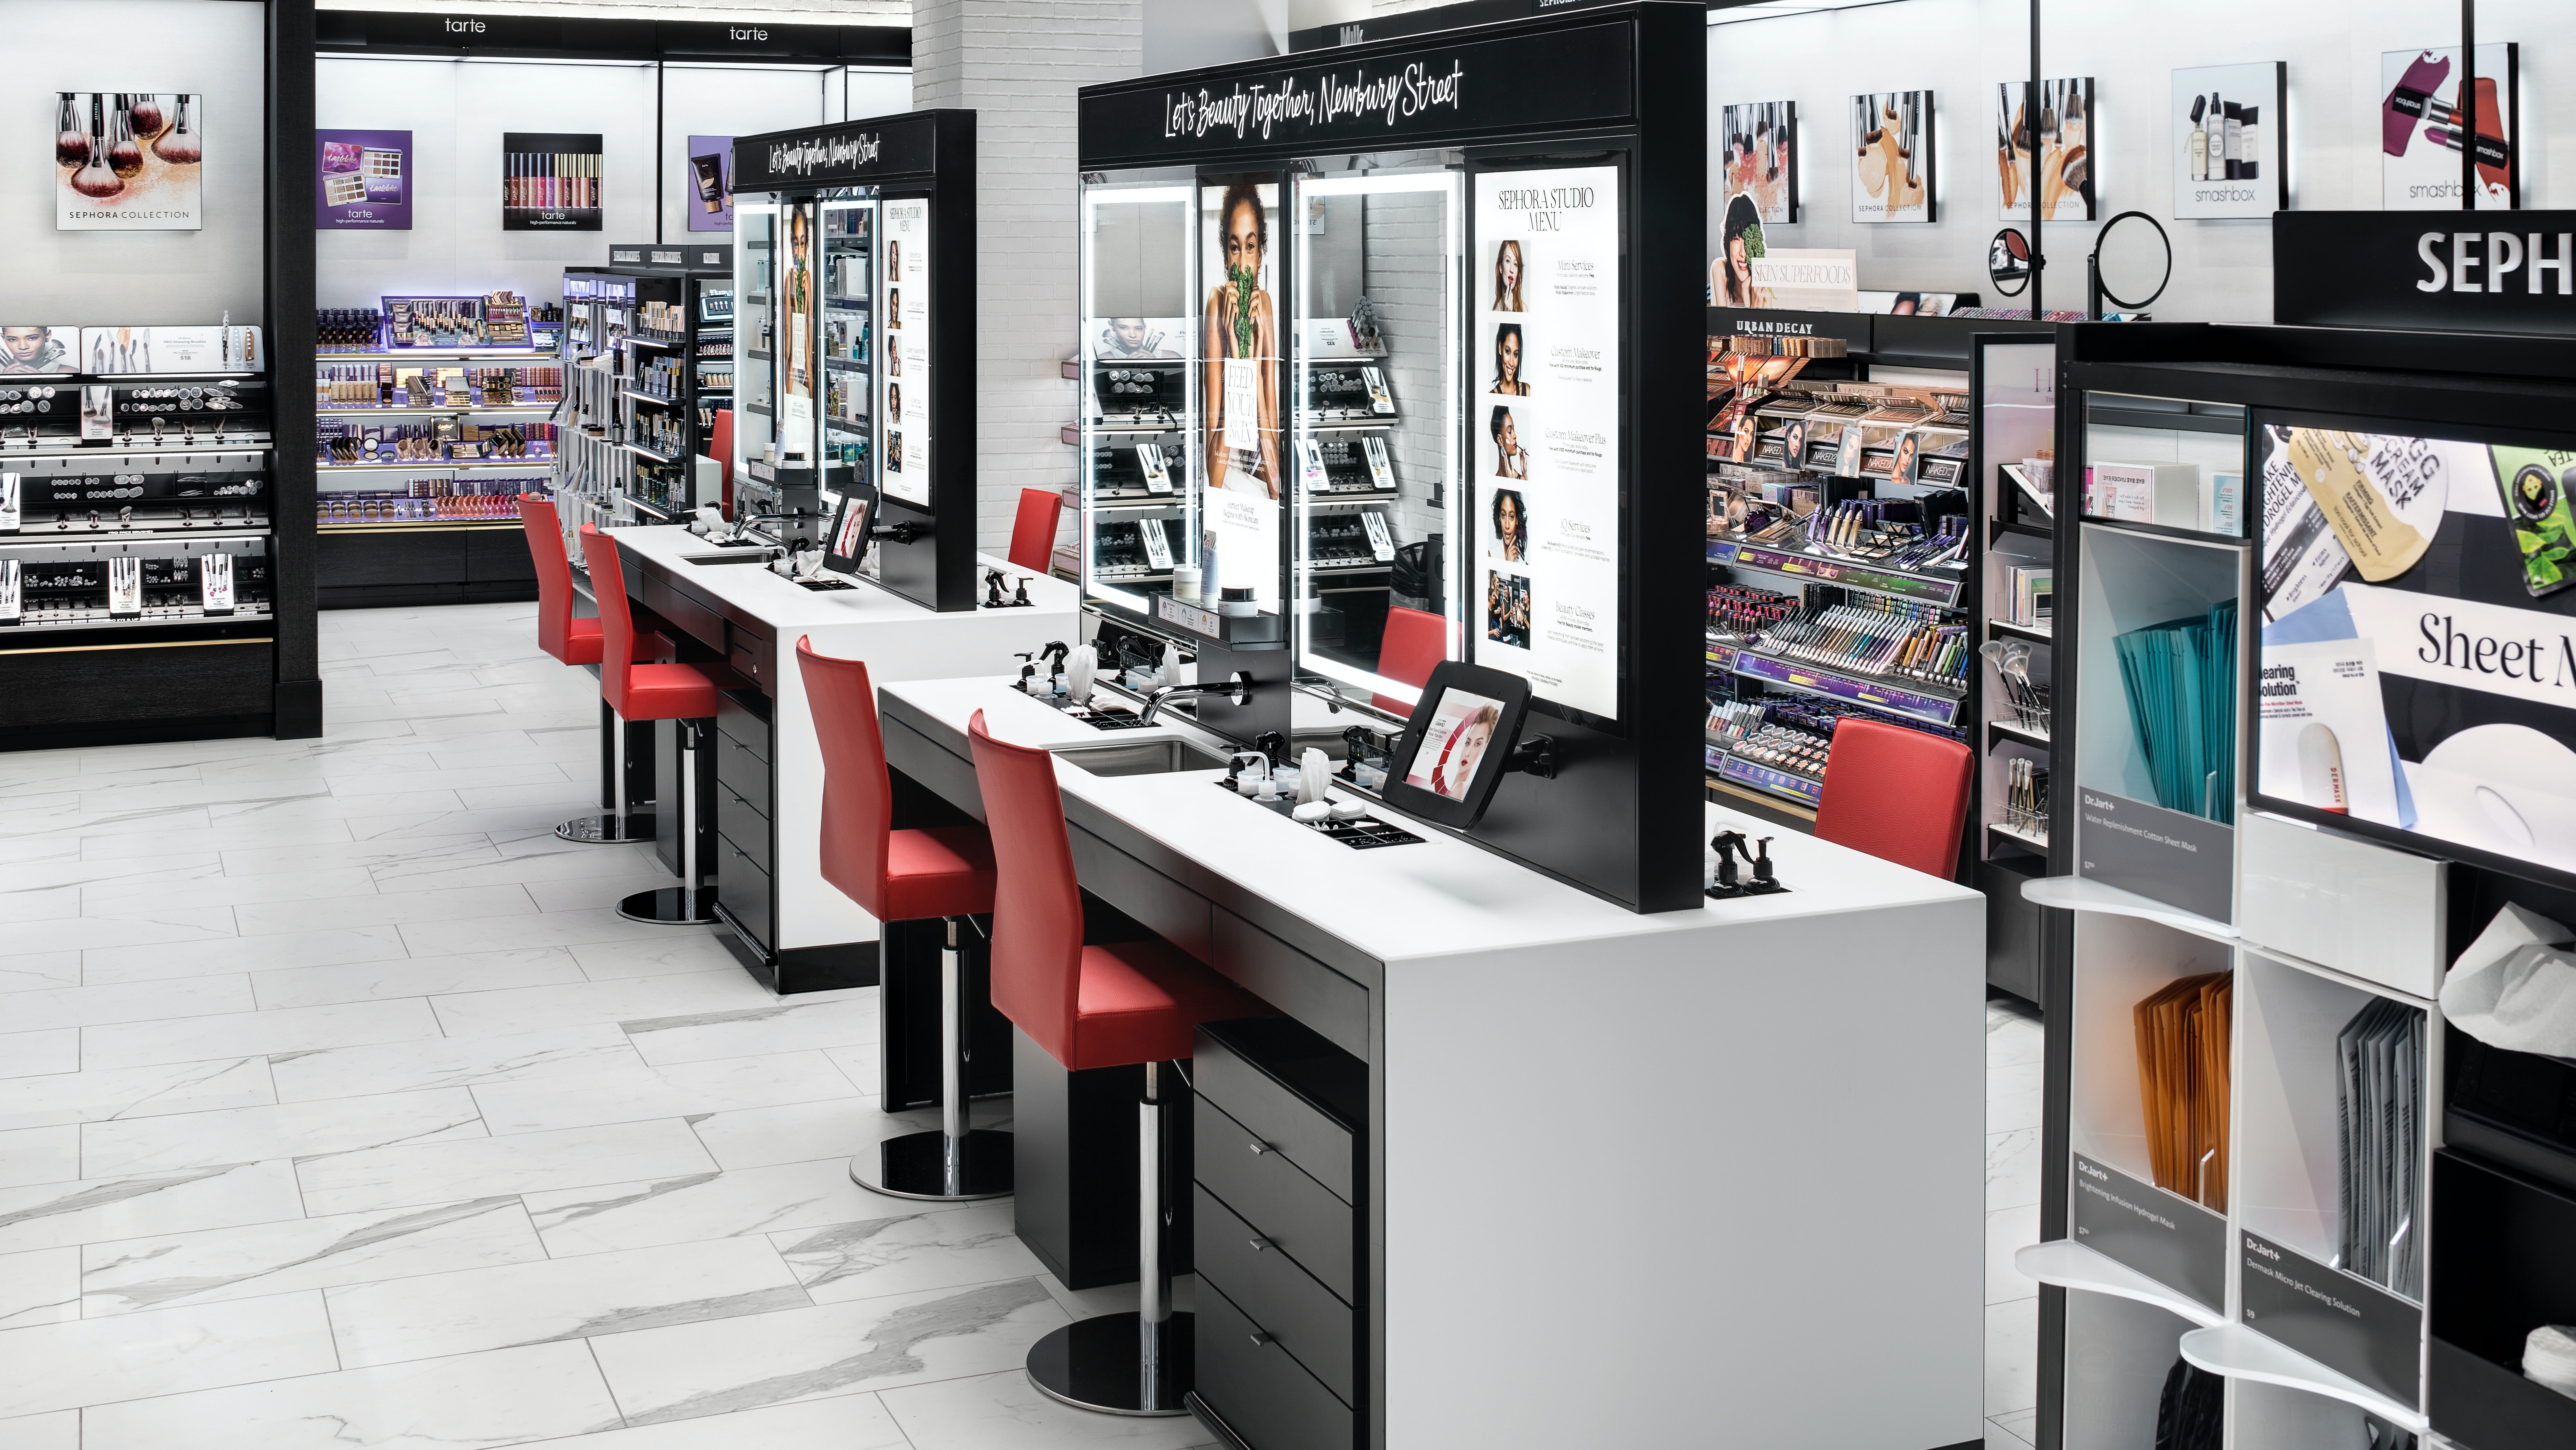 Sephora is bringing back 'beloved and largest beauty event' of the year and  customers will love the exclusive products